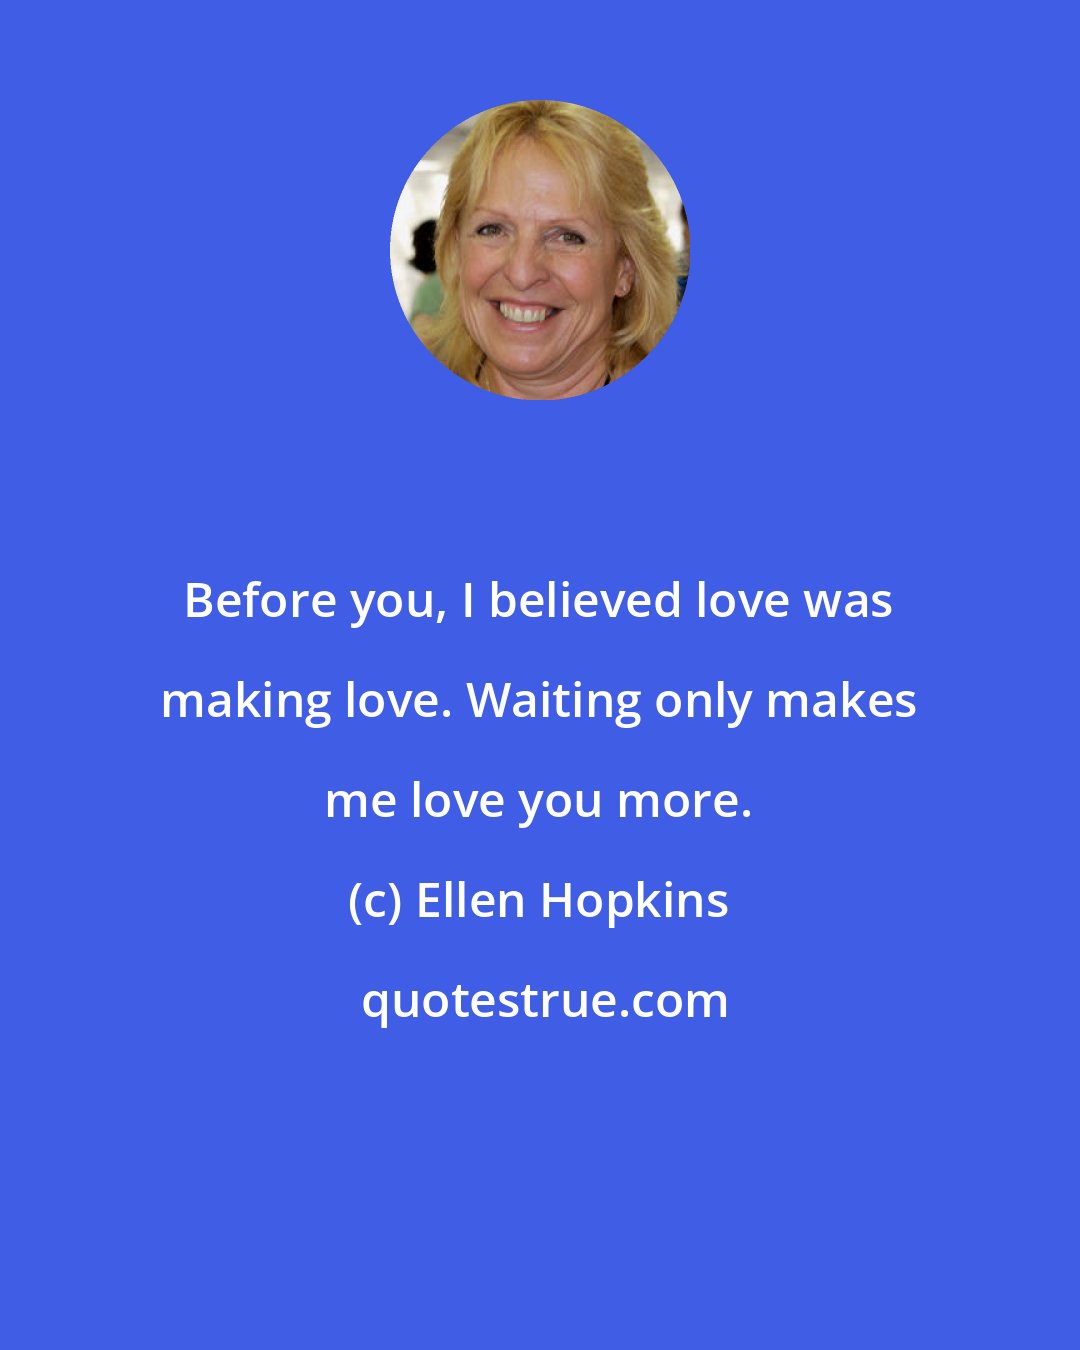 Ellen Hopkins: Before you, I believed love was making love. Waiting only makes me love you more.